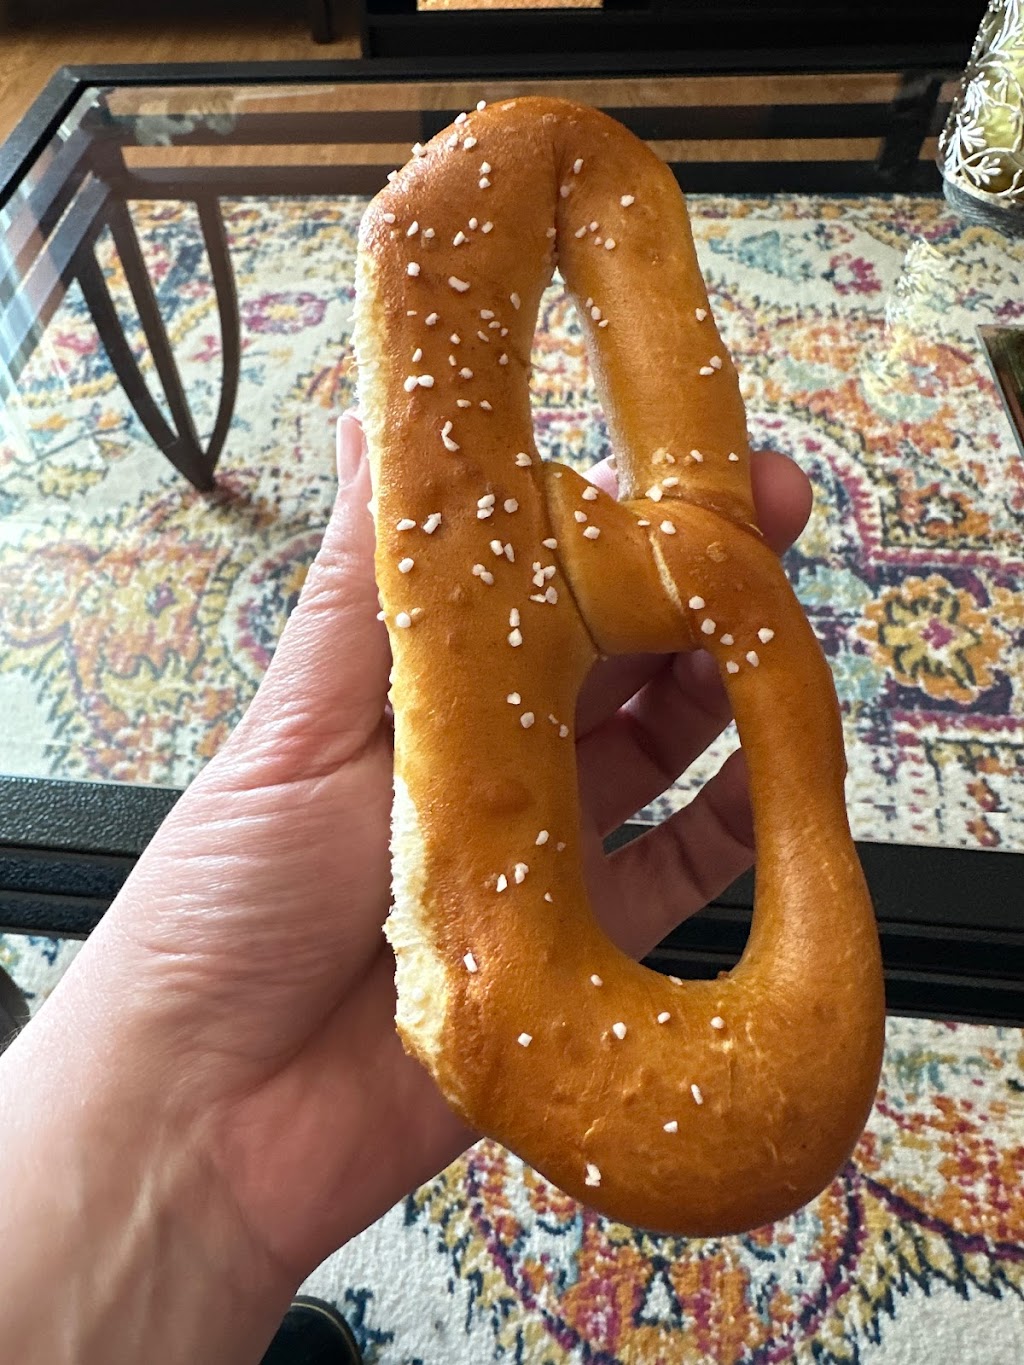 Philly Style Soft Pretzel | 920 Woodbourne Rd, Levittown, PA 19057 | Phone: (215) 946-0300